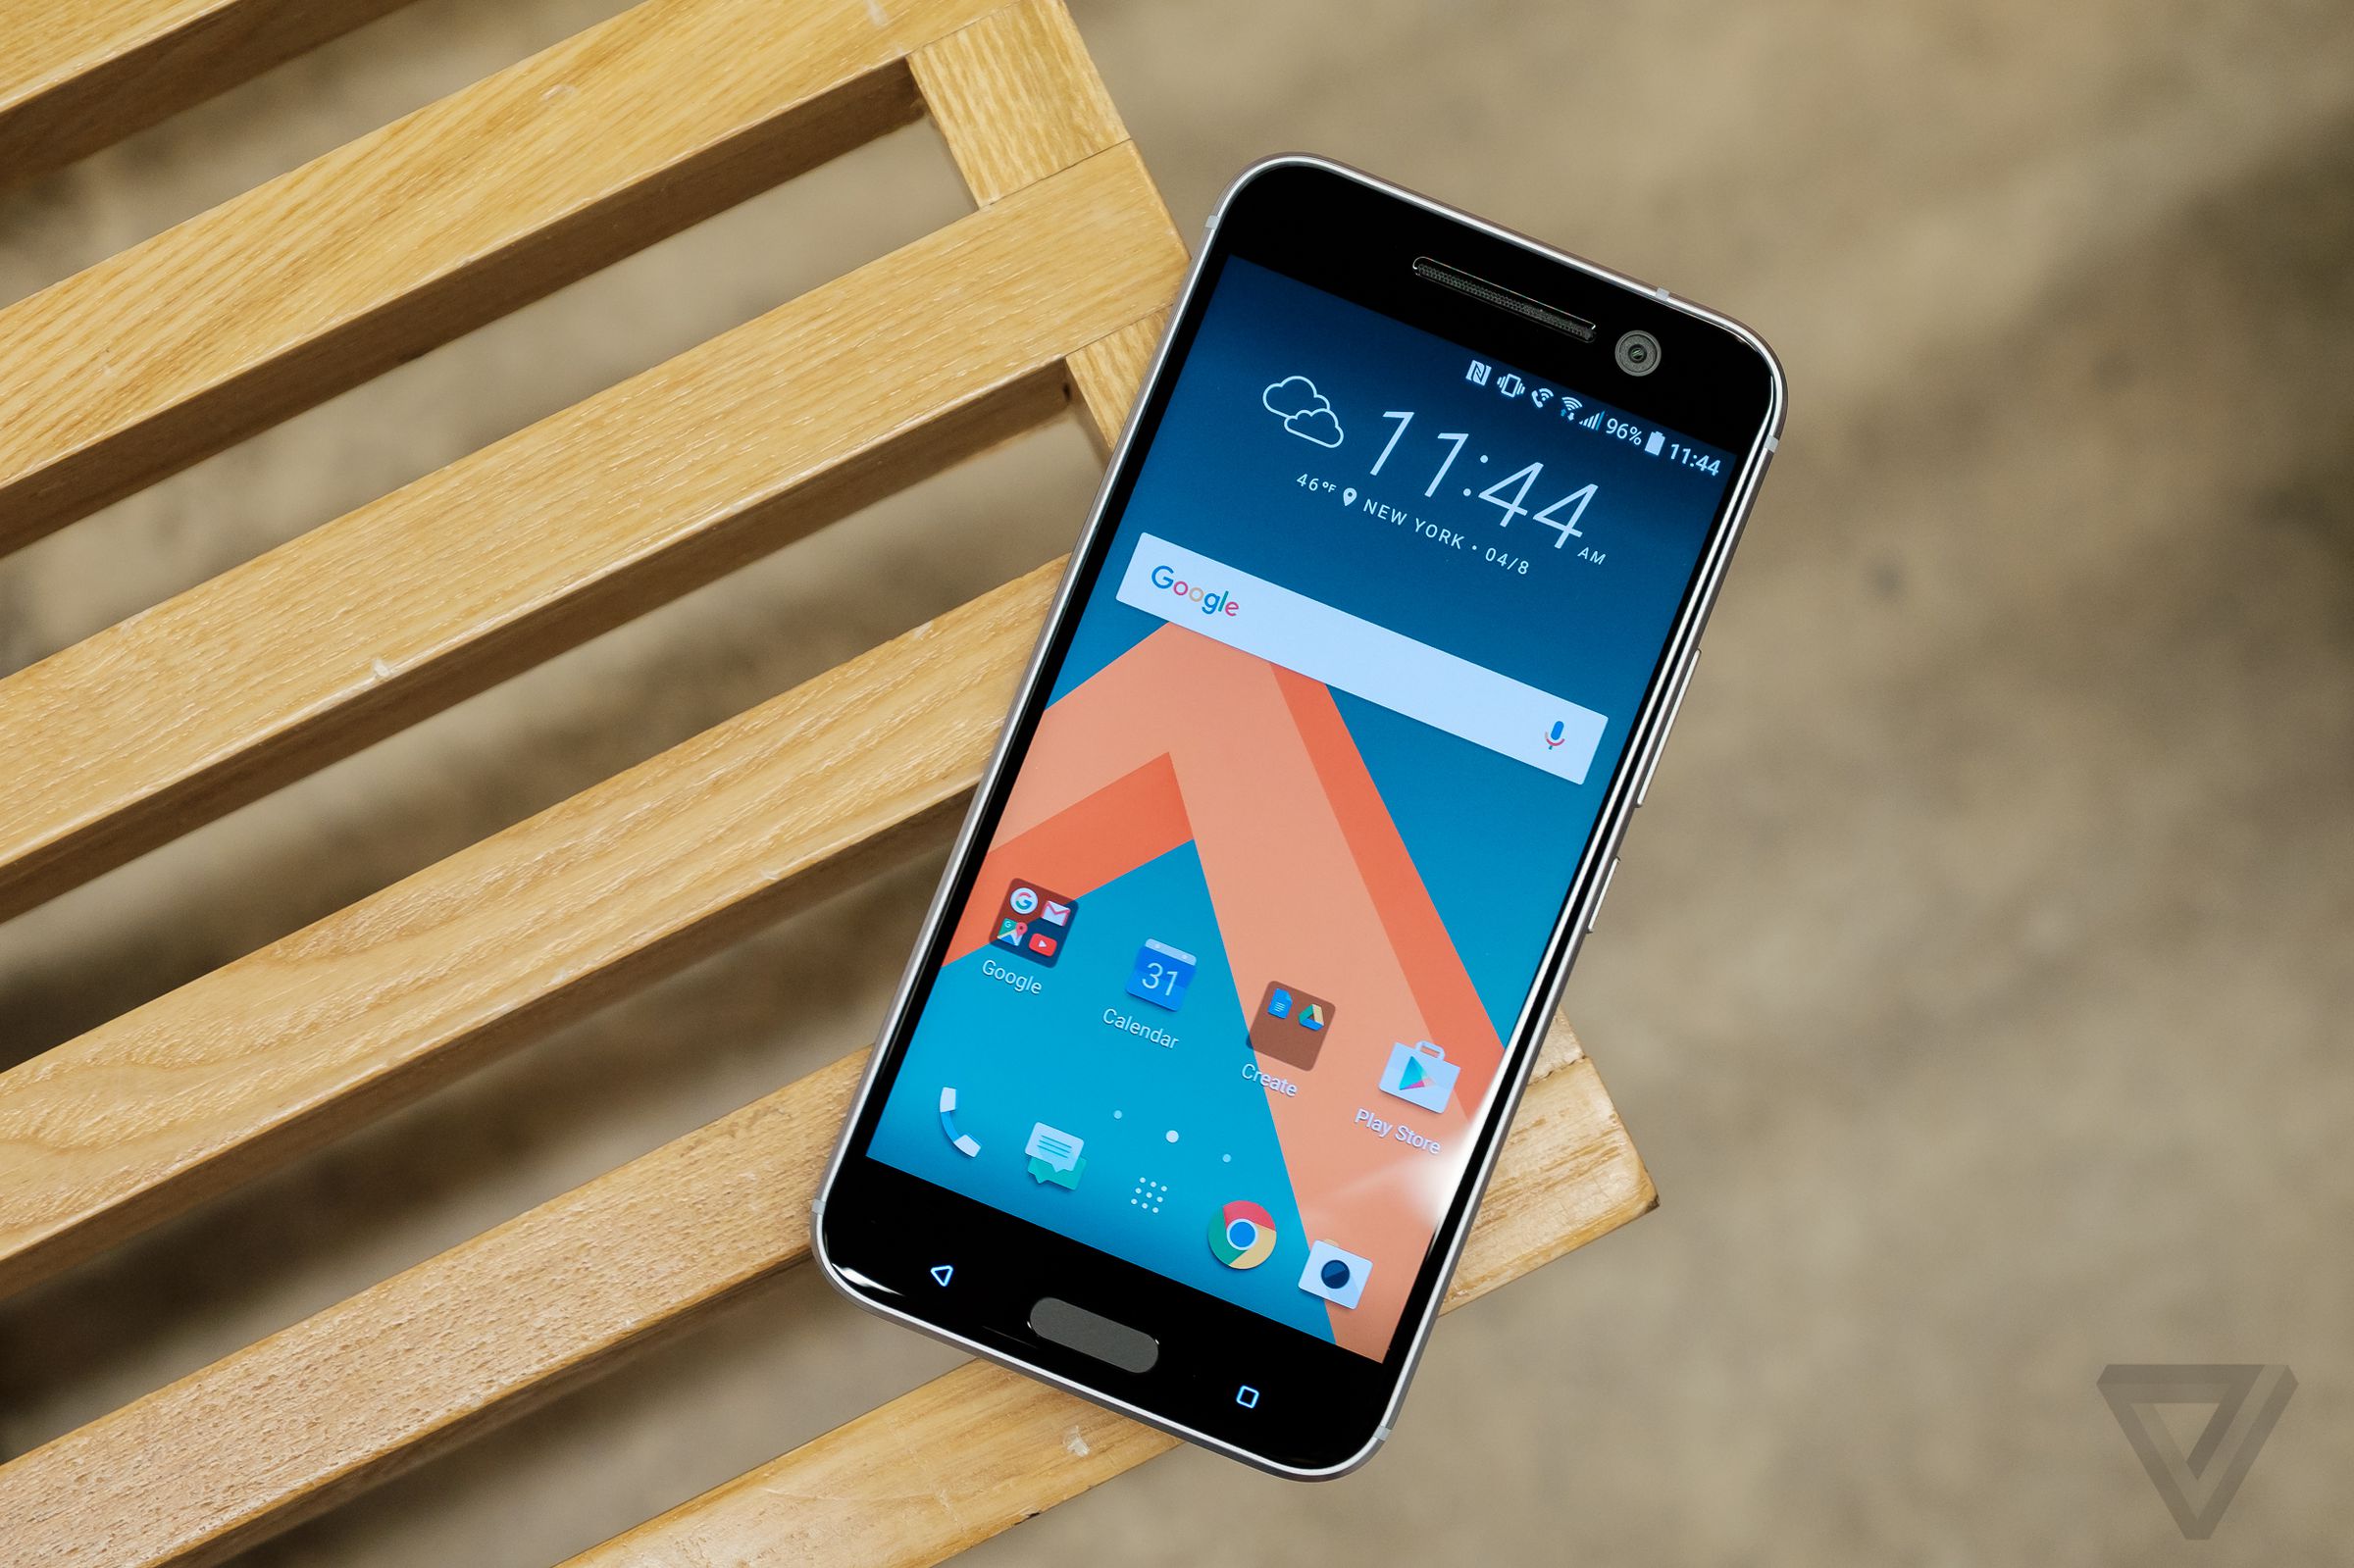 HTC 10 hands-on photos